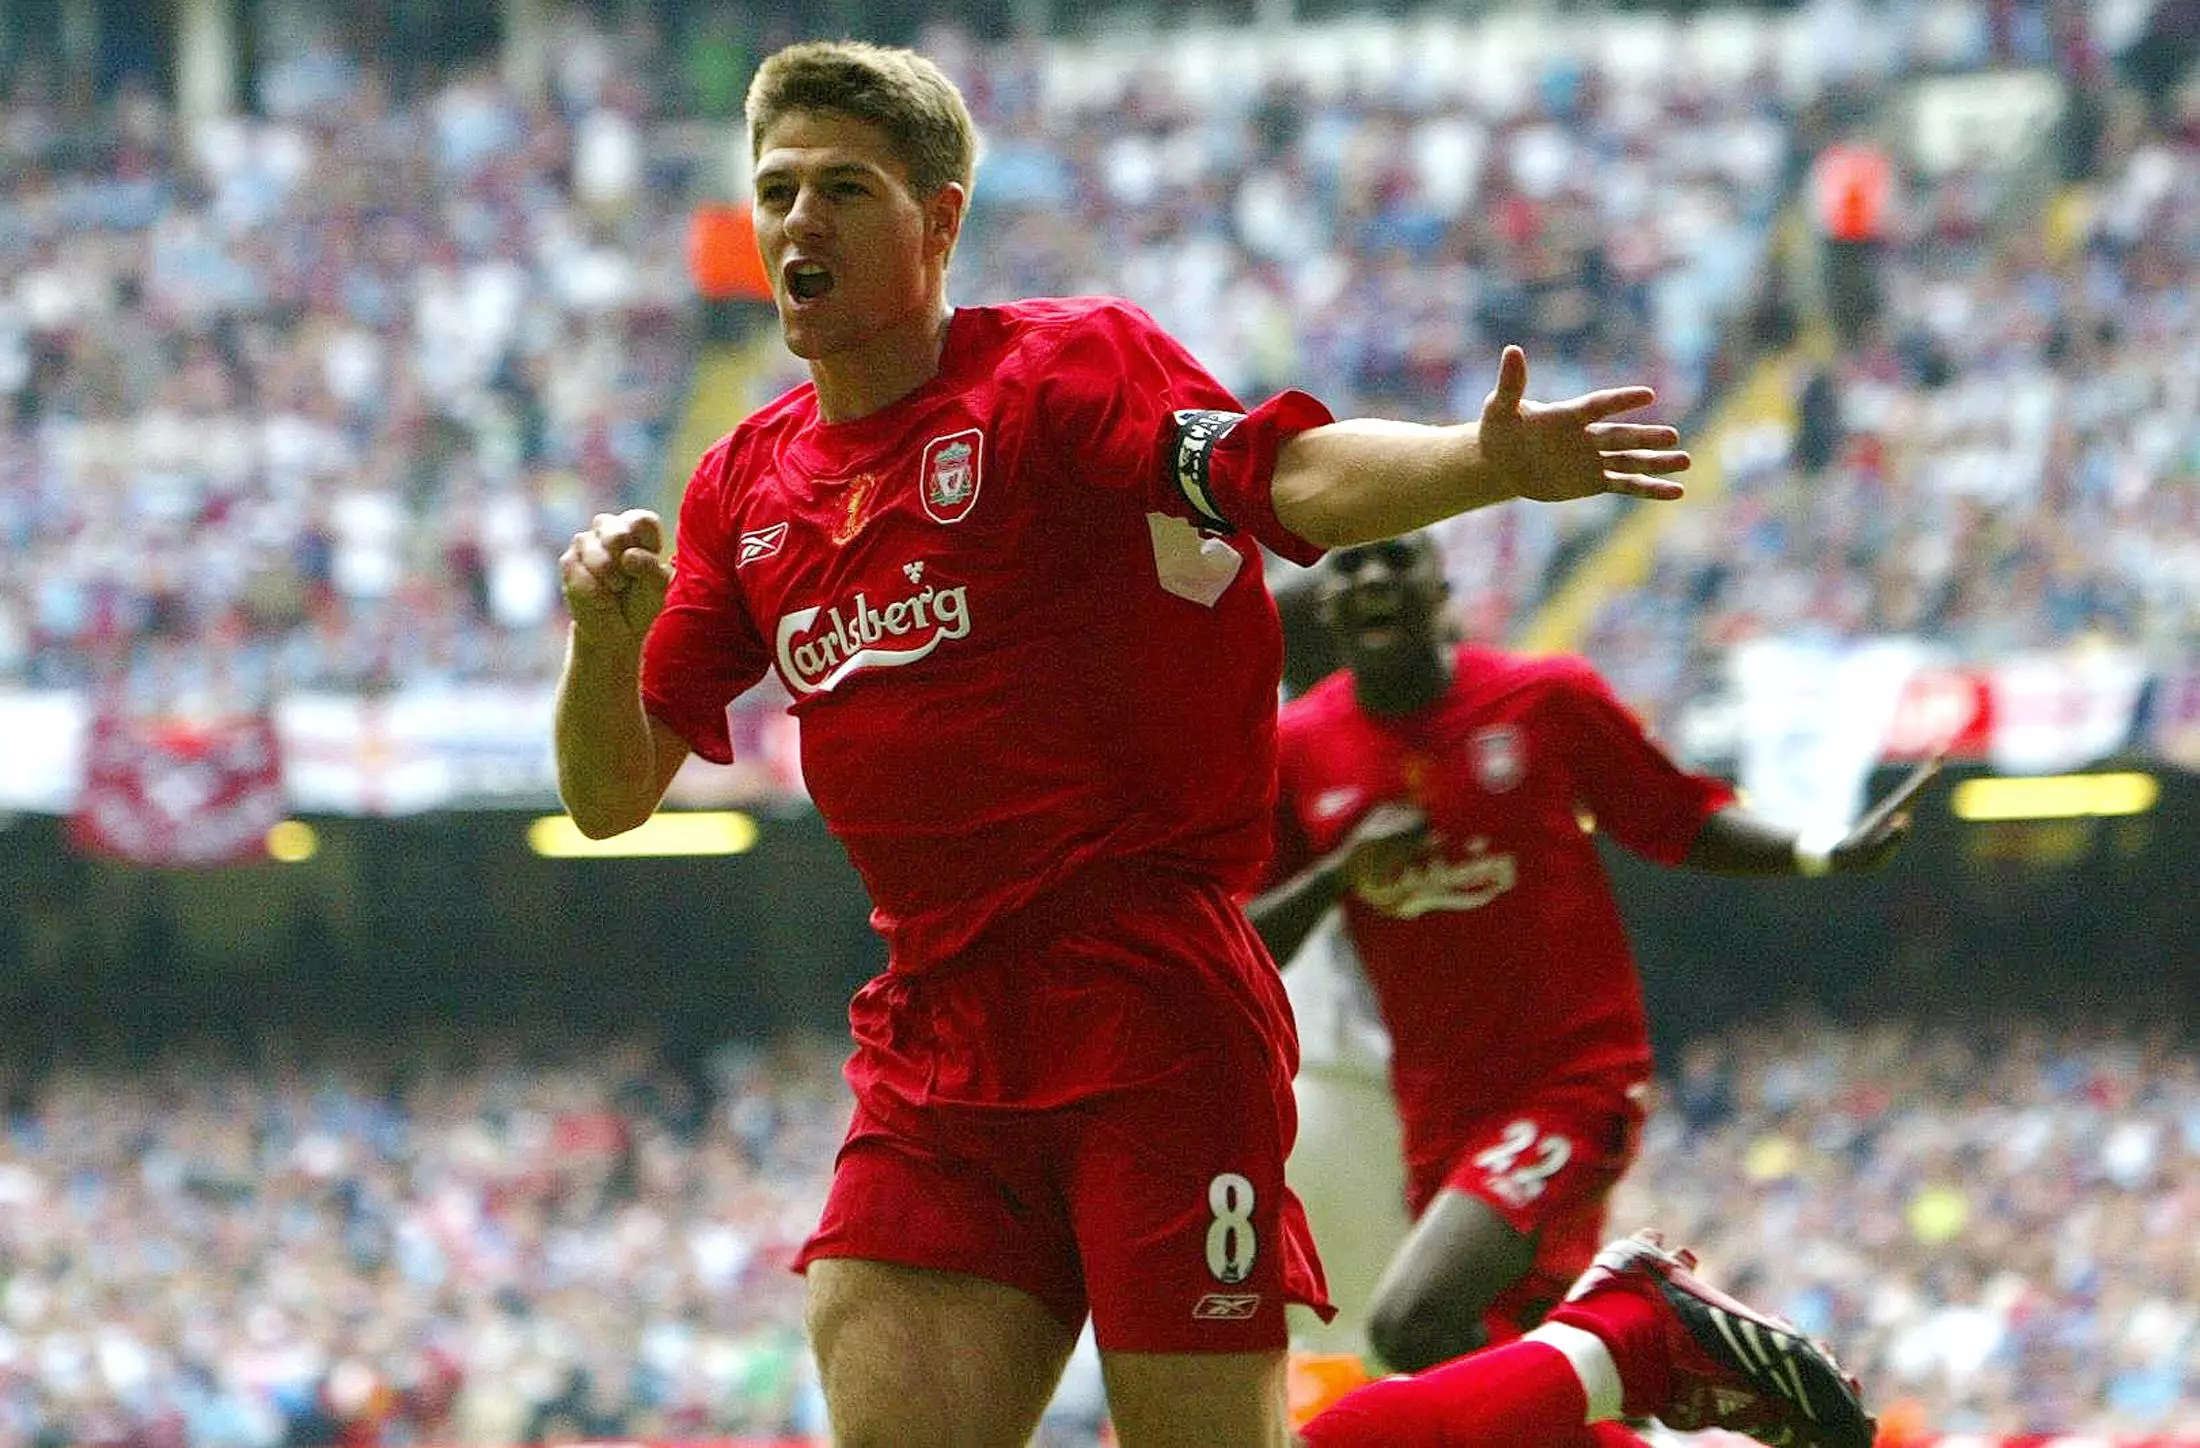 Steven Gerrard single-handedly won Liverpool the 2006 FA Cup final against West Ham